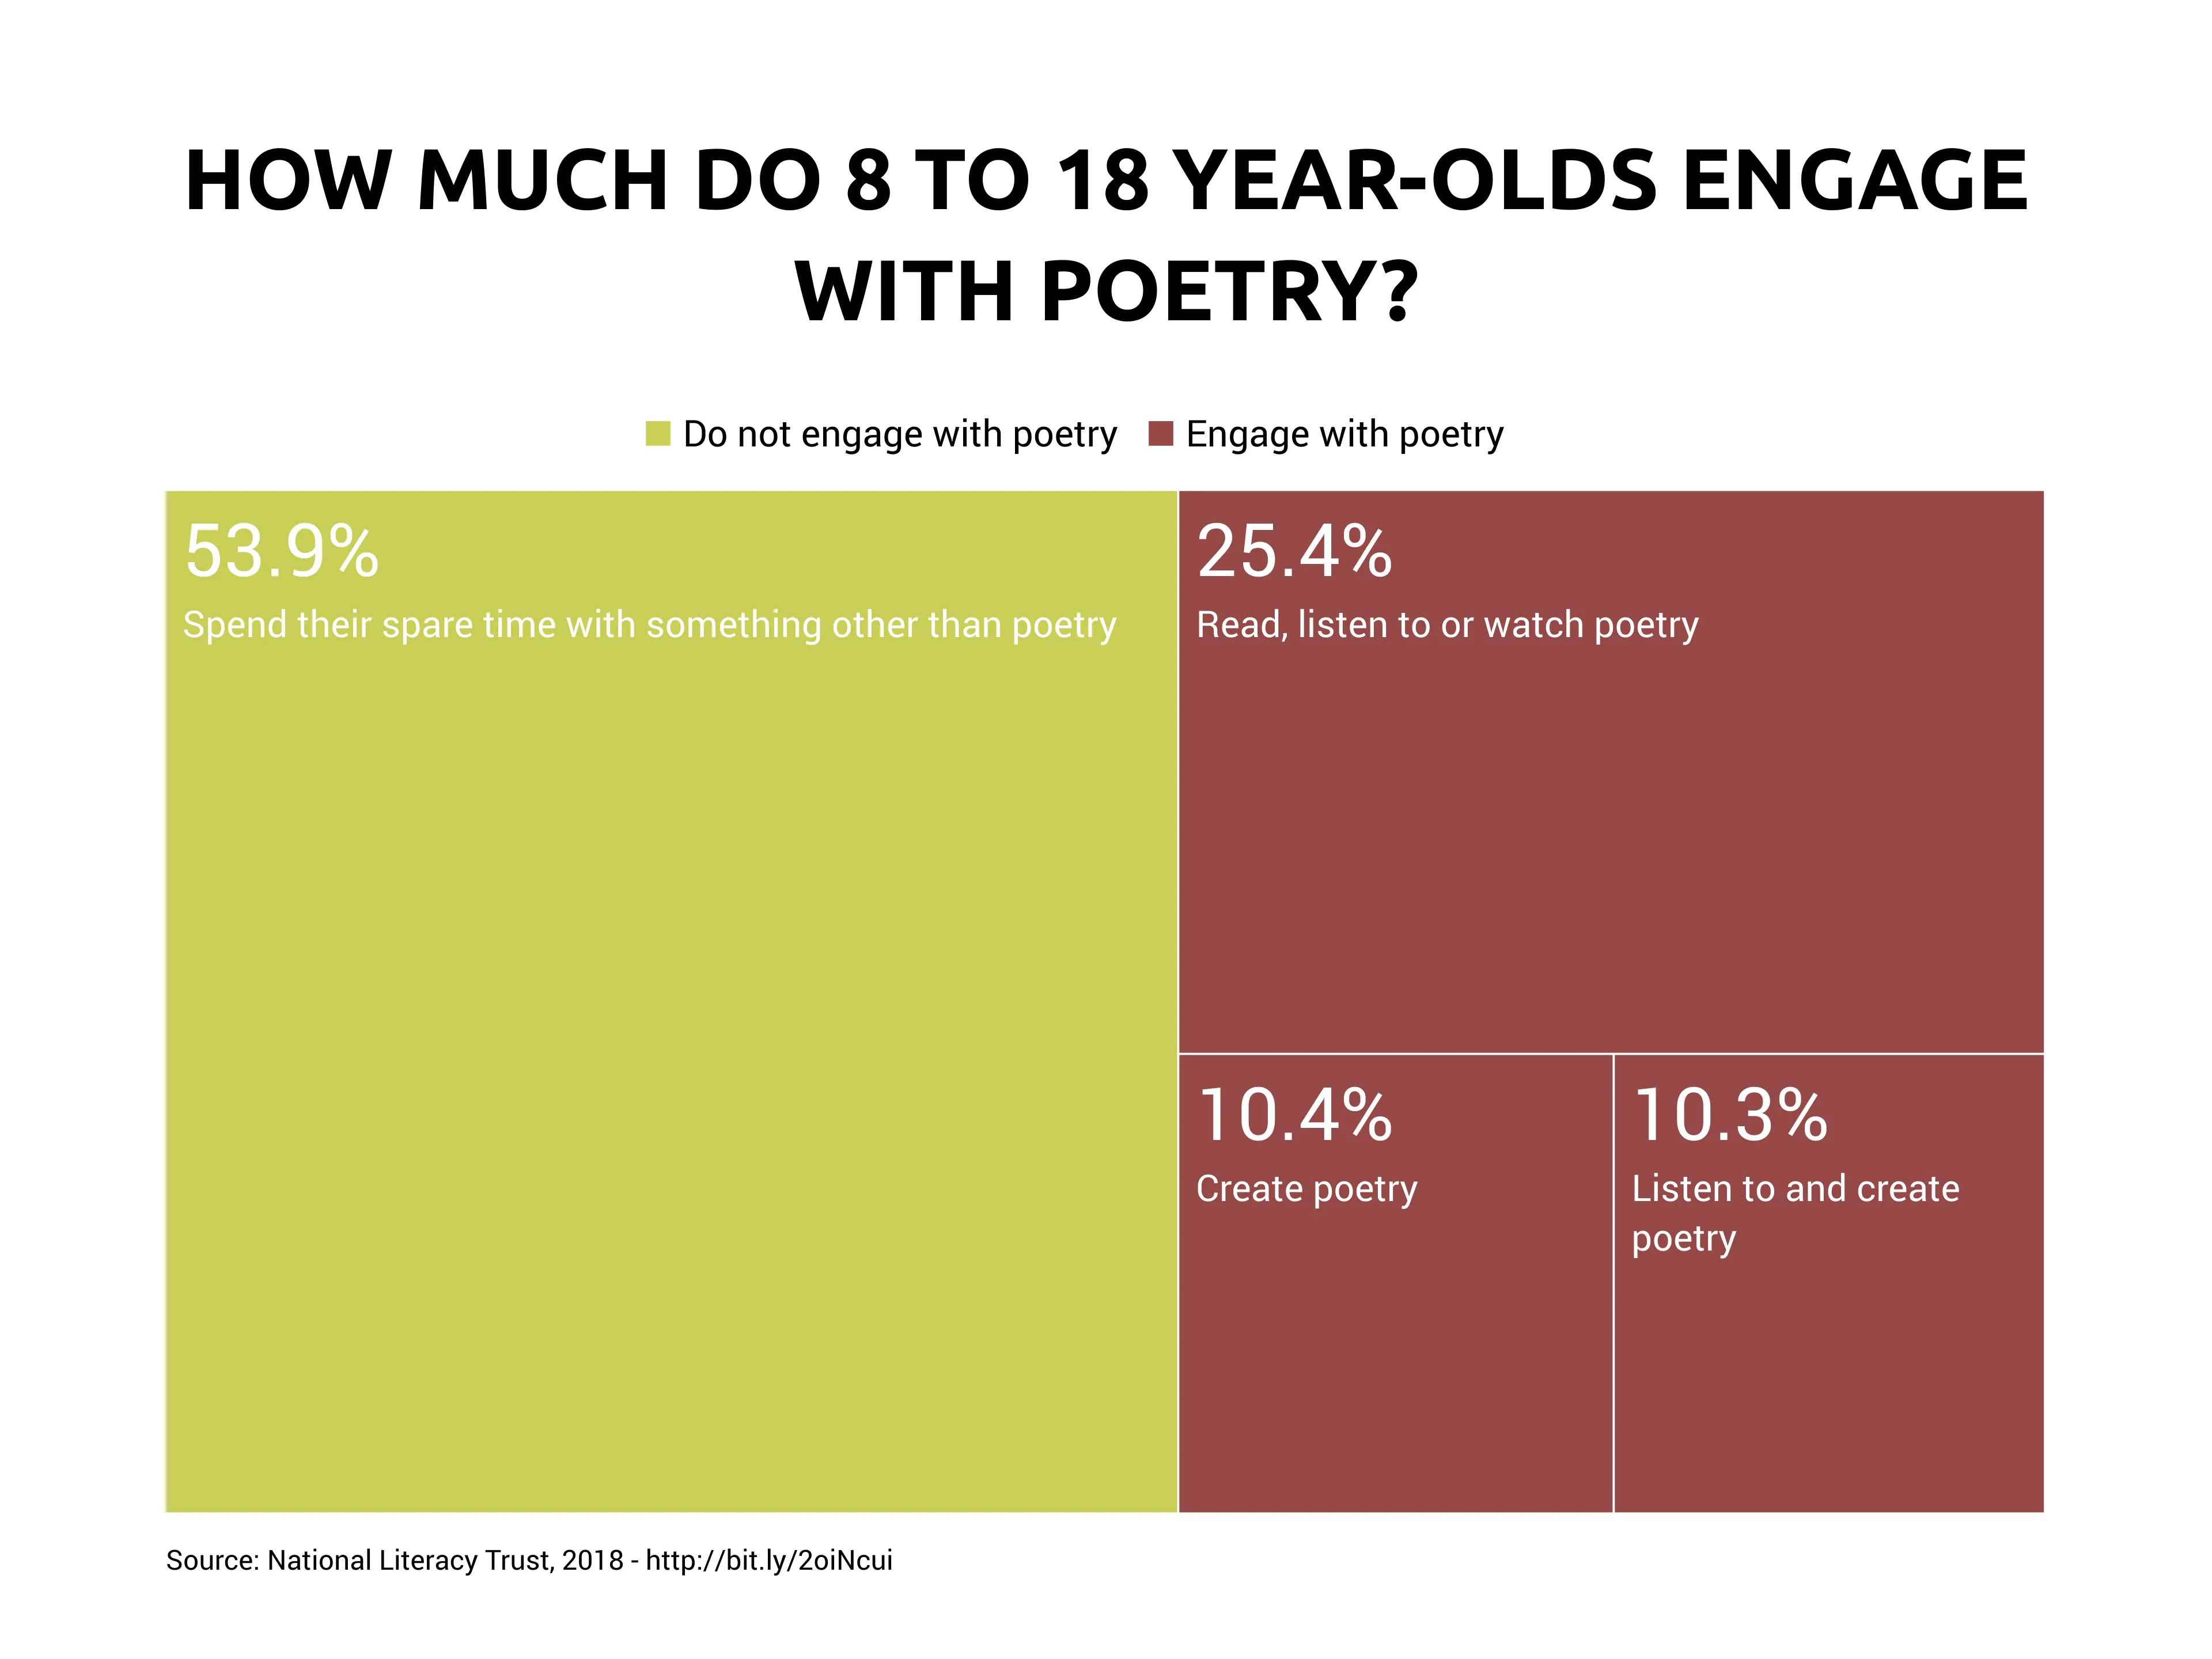 HOW MUCH DO 8 TO 18 YEAR-OLDS ENGAGE WITH POETRY?